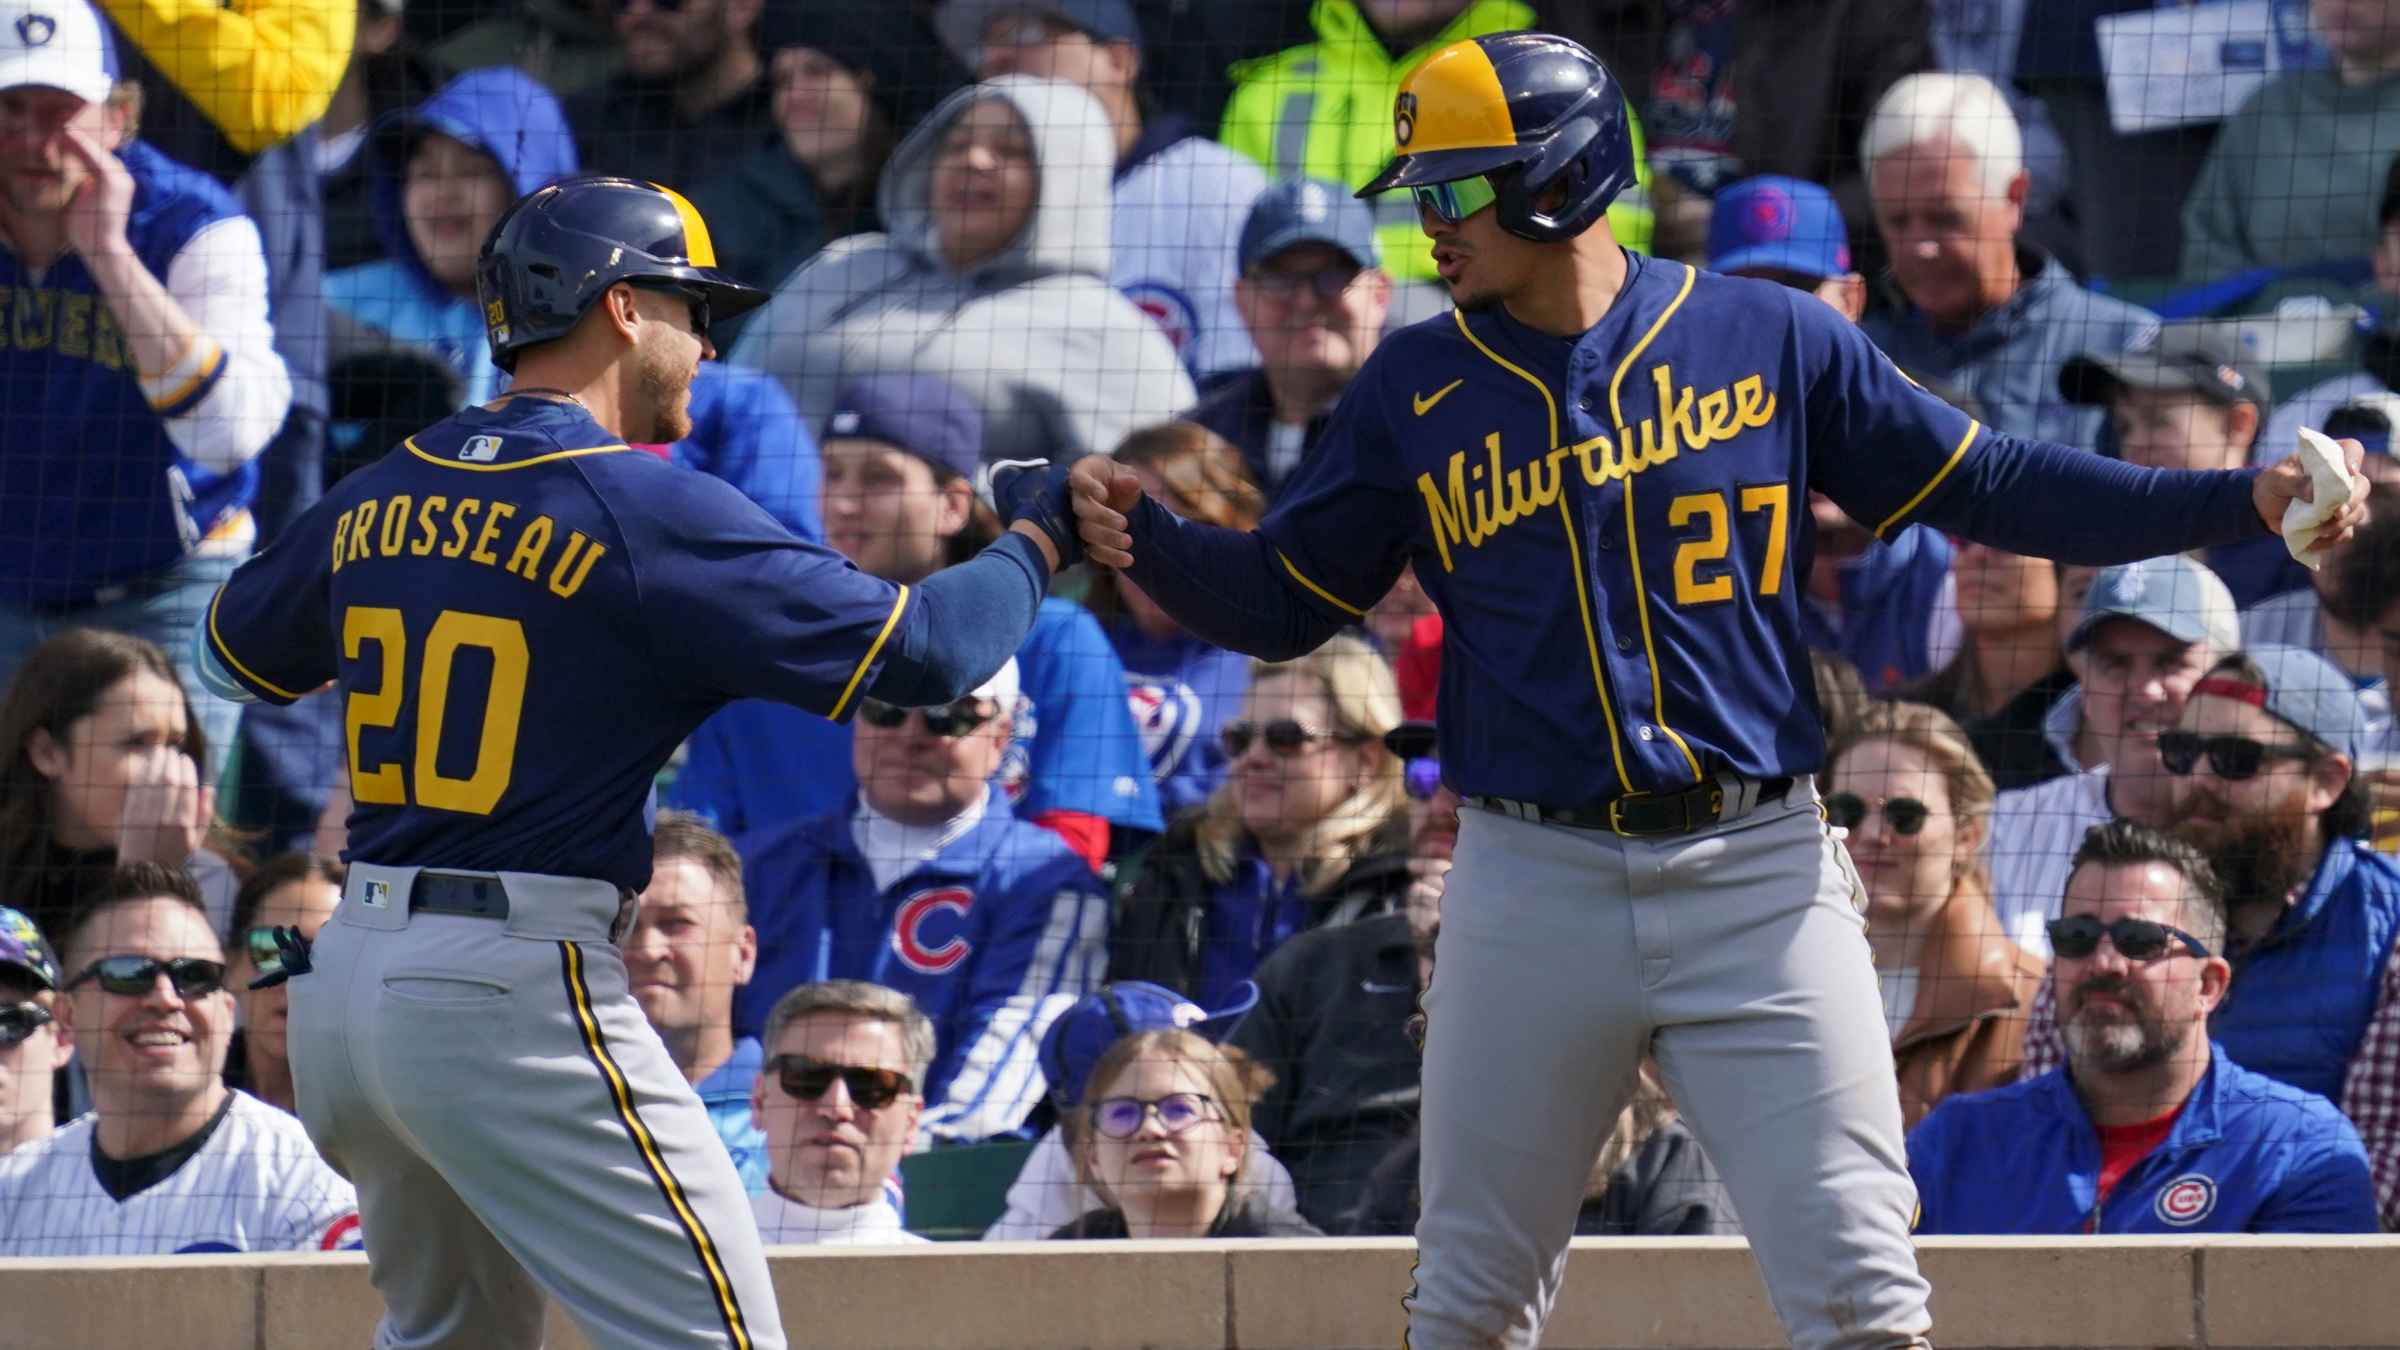 MLB Gameday Brewers 5, Cubs 4 Final Score (04/10/2022)